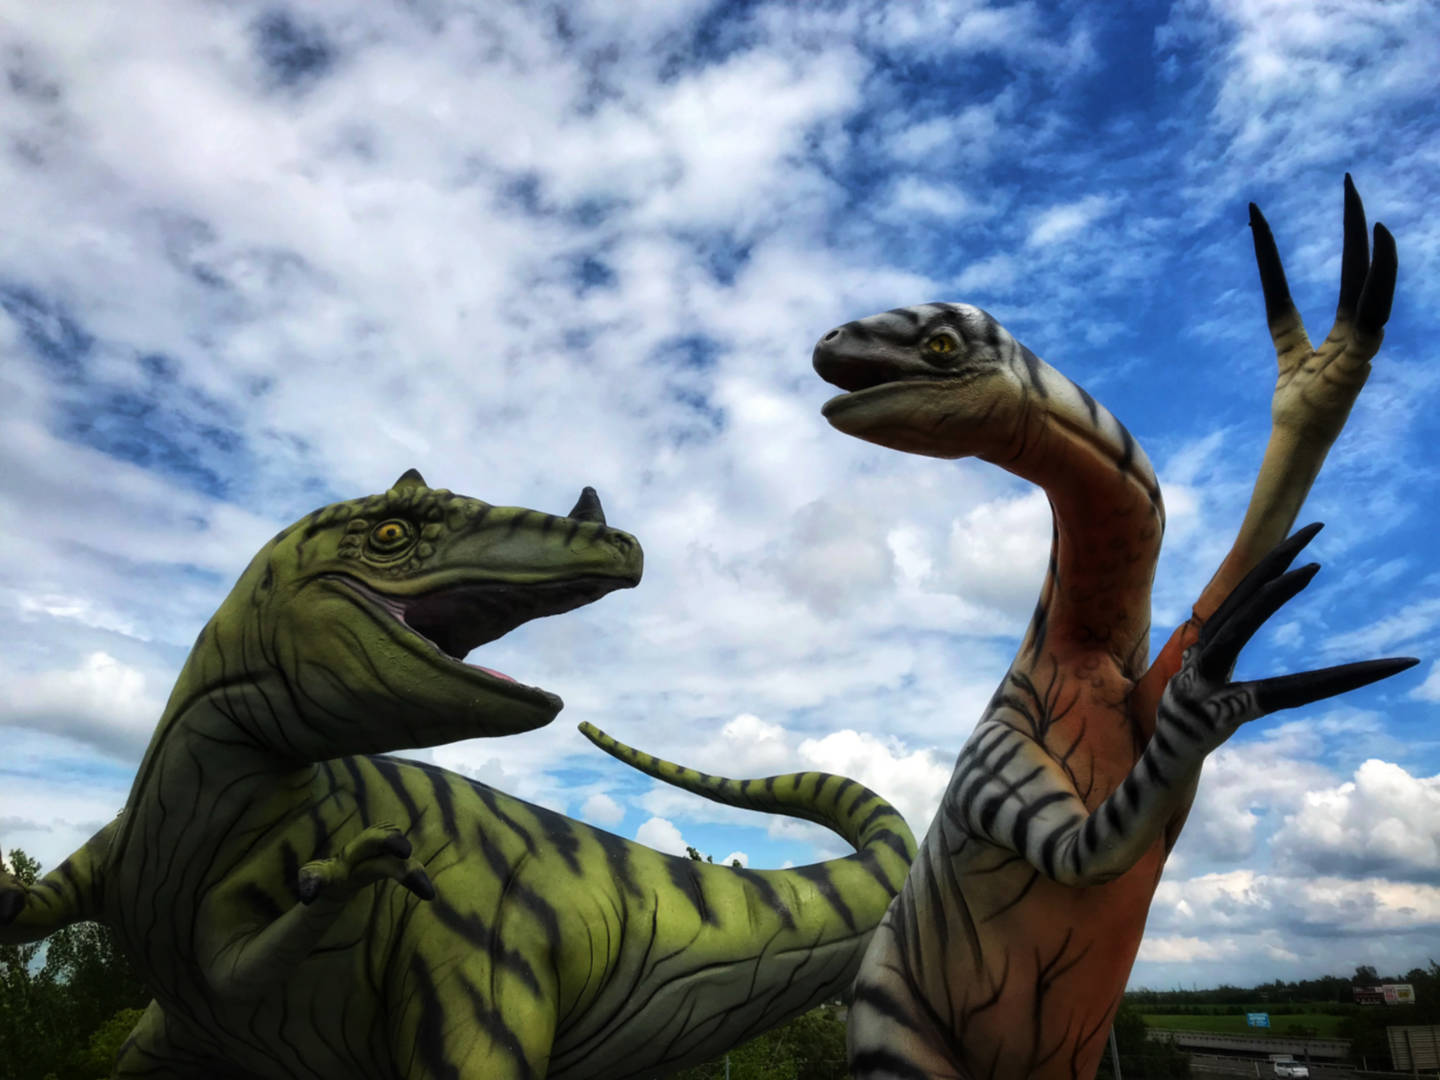 photo of 2 life-sized fiberglass dinosaurs fighting at Le Madrid Quebec